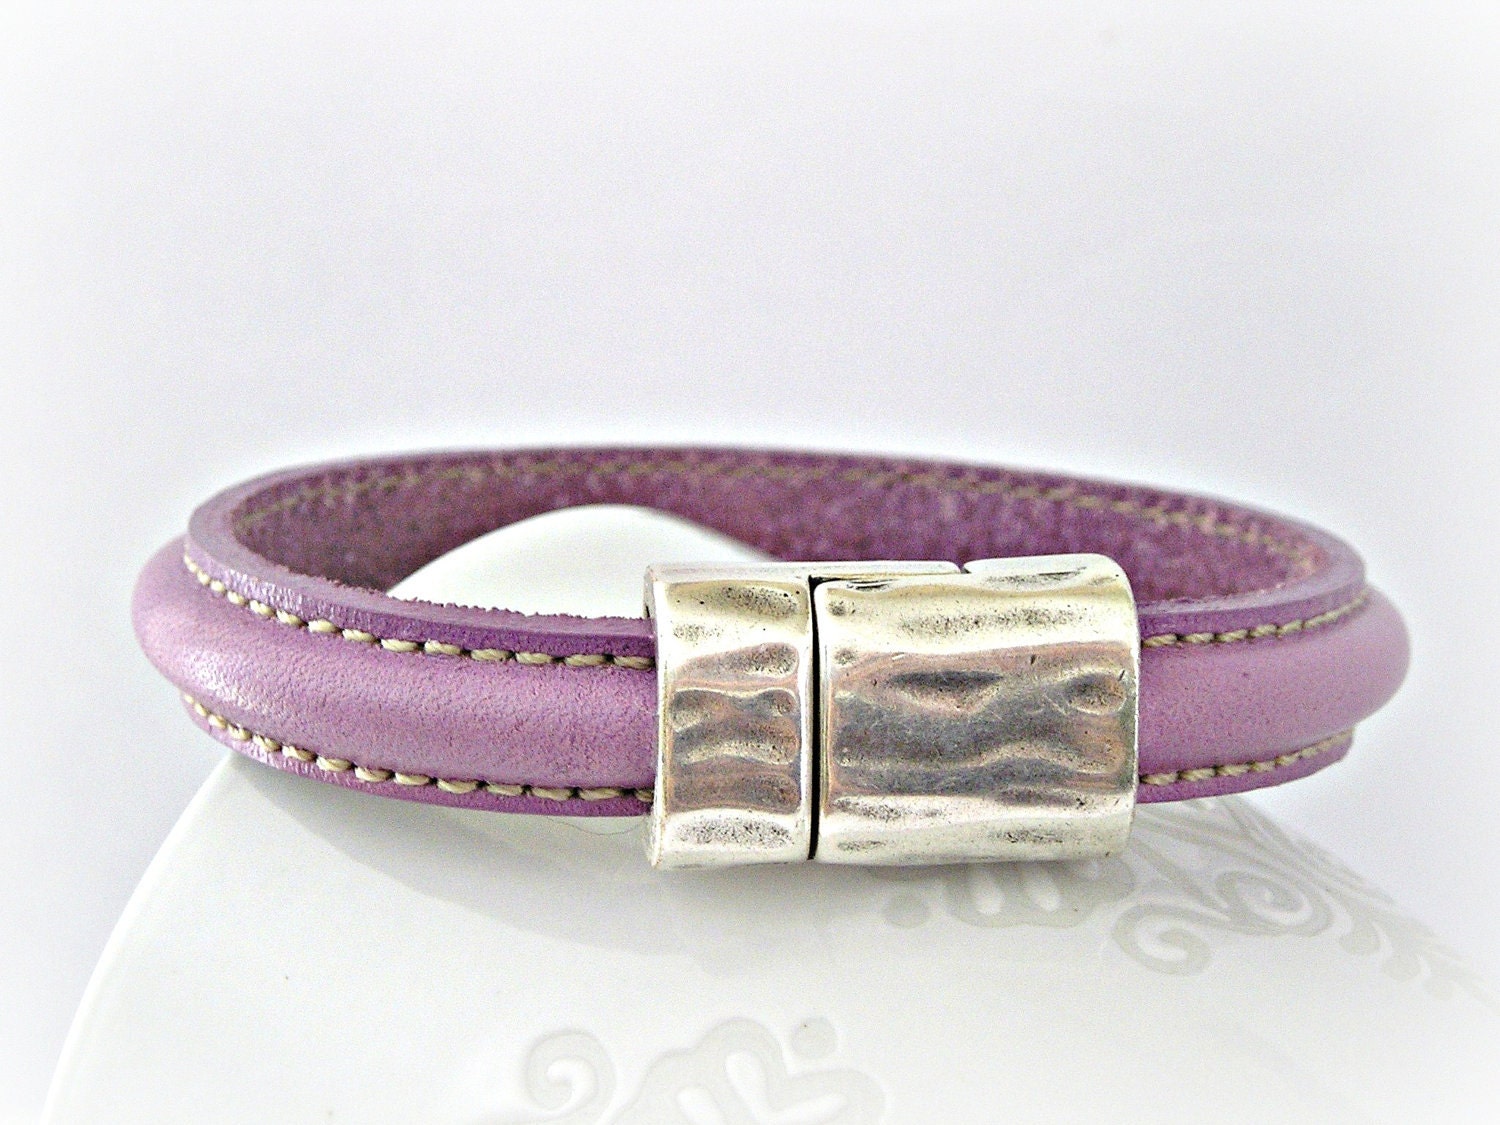 Amethyst semiround double sewed leather bracelet with zamak magnetic clasp